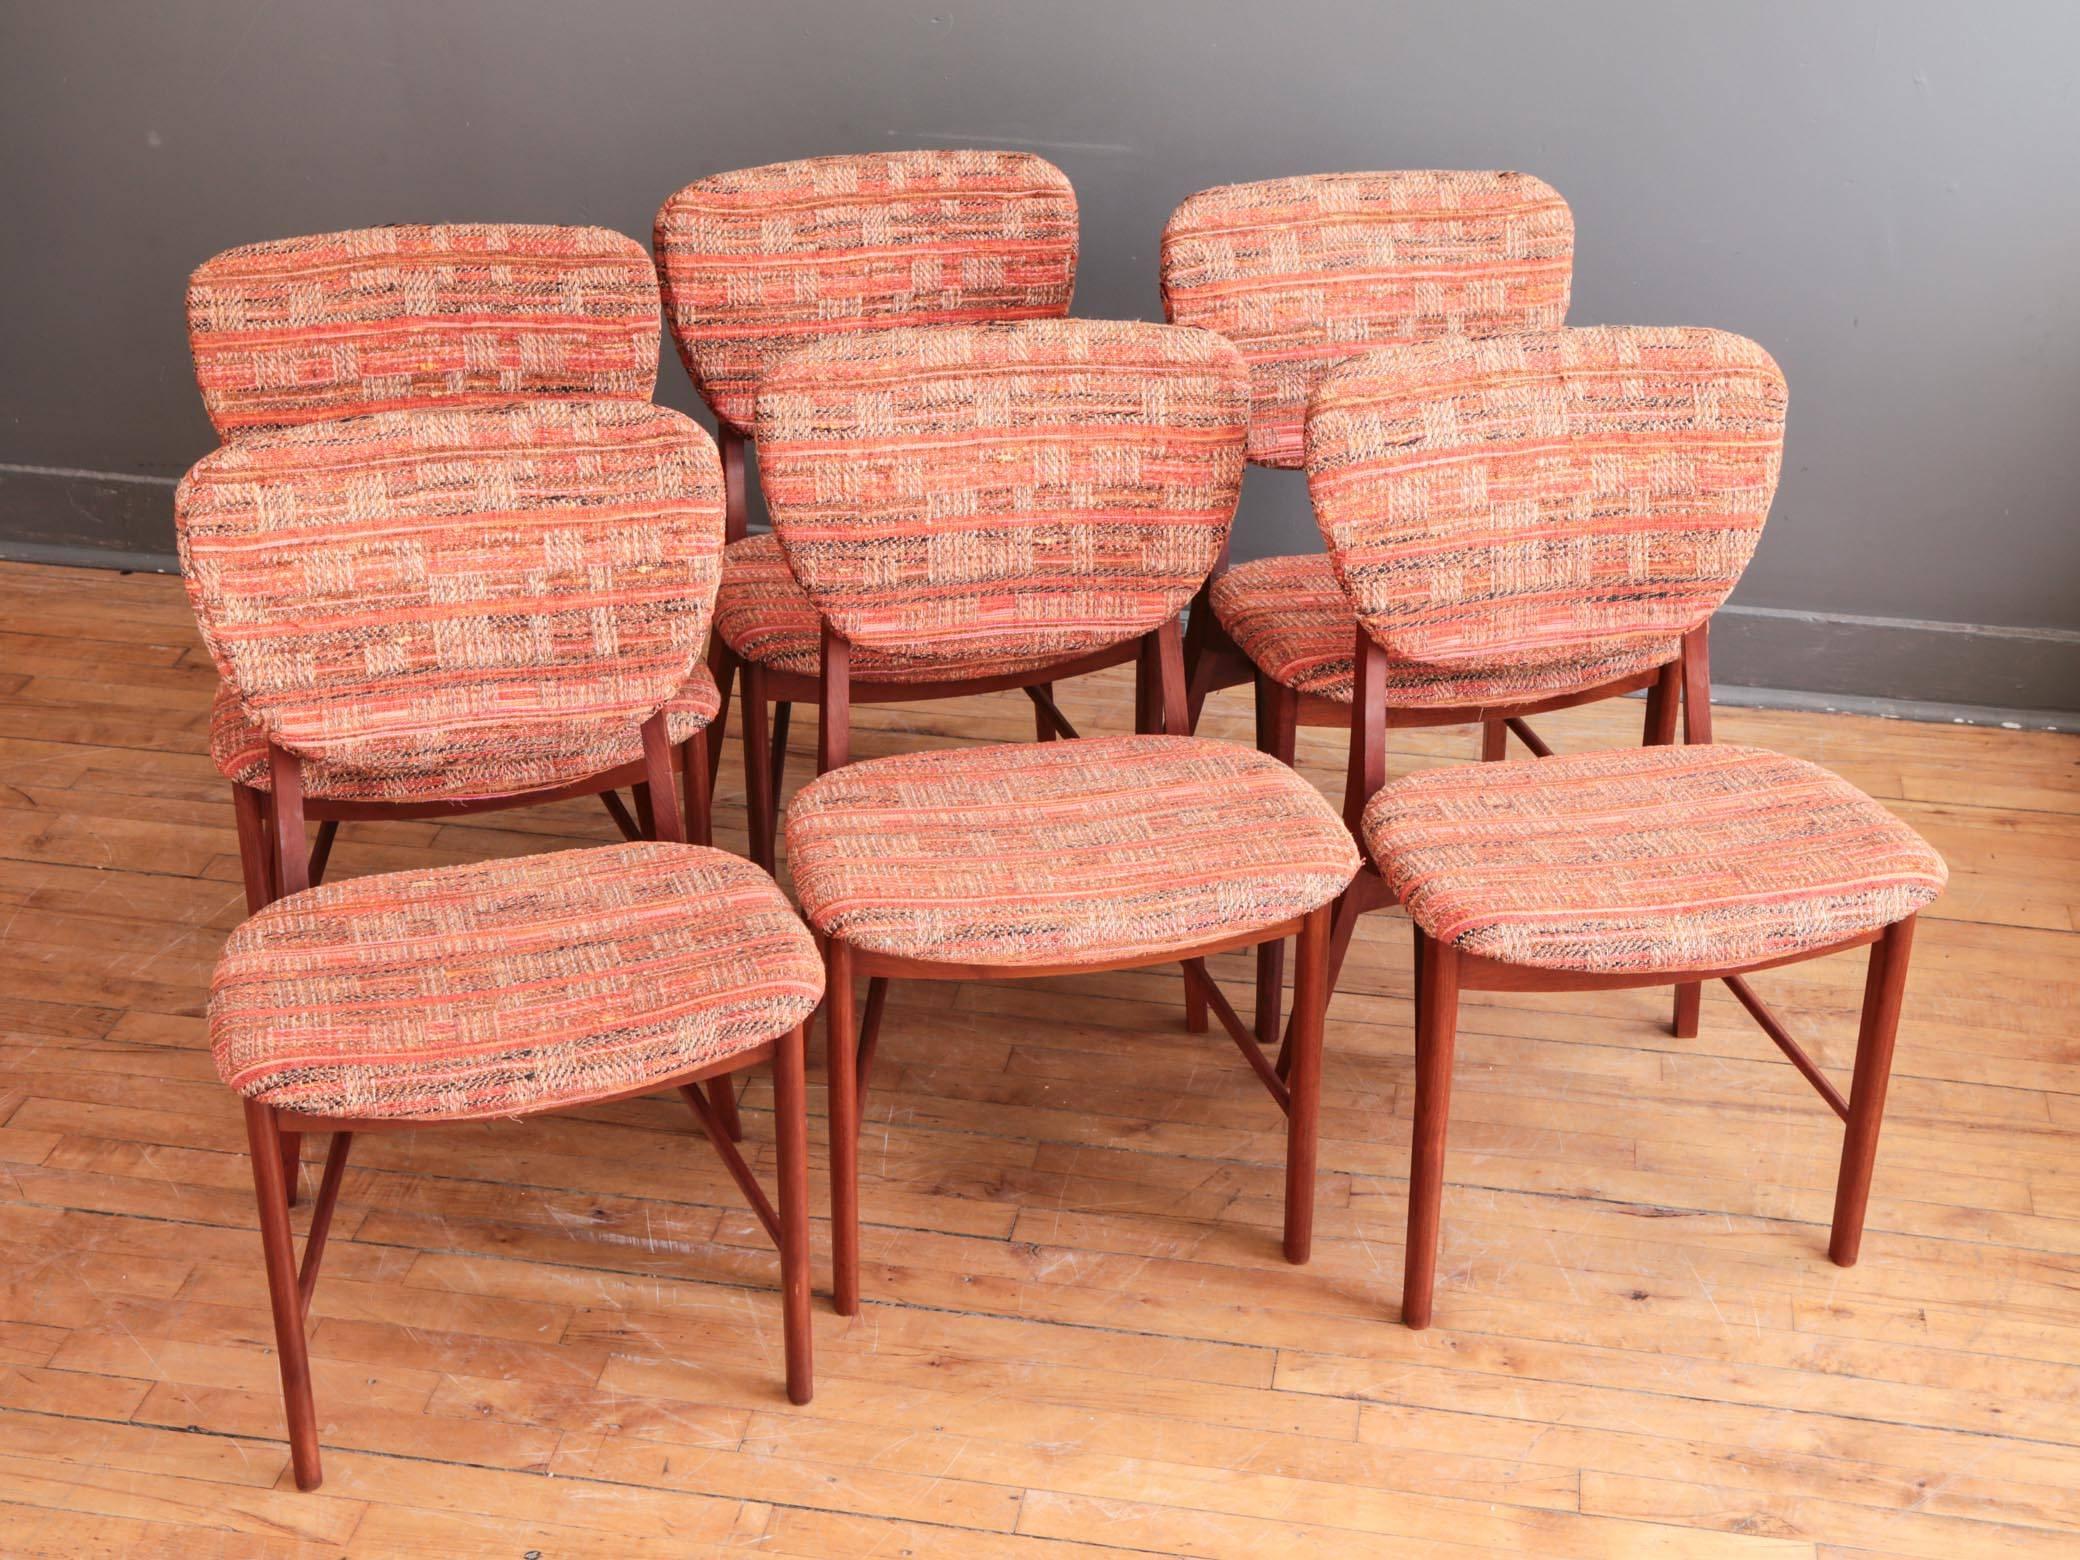 A handsome set of six dining chairs designed by Neils Vodder, circa 1950s. Each chair featuring a solid frame of old growth teak with an upholstered seat and back. Branded Neils Vodder mark to underside of each chair. 

A comfortable and